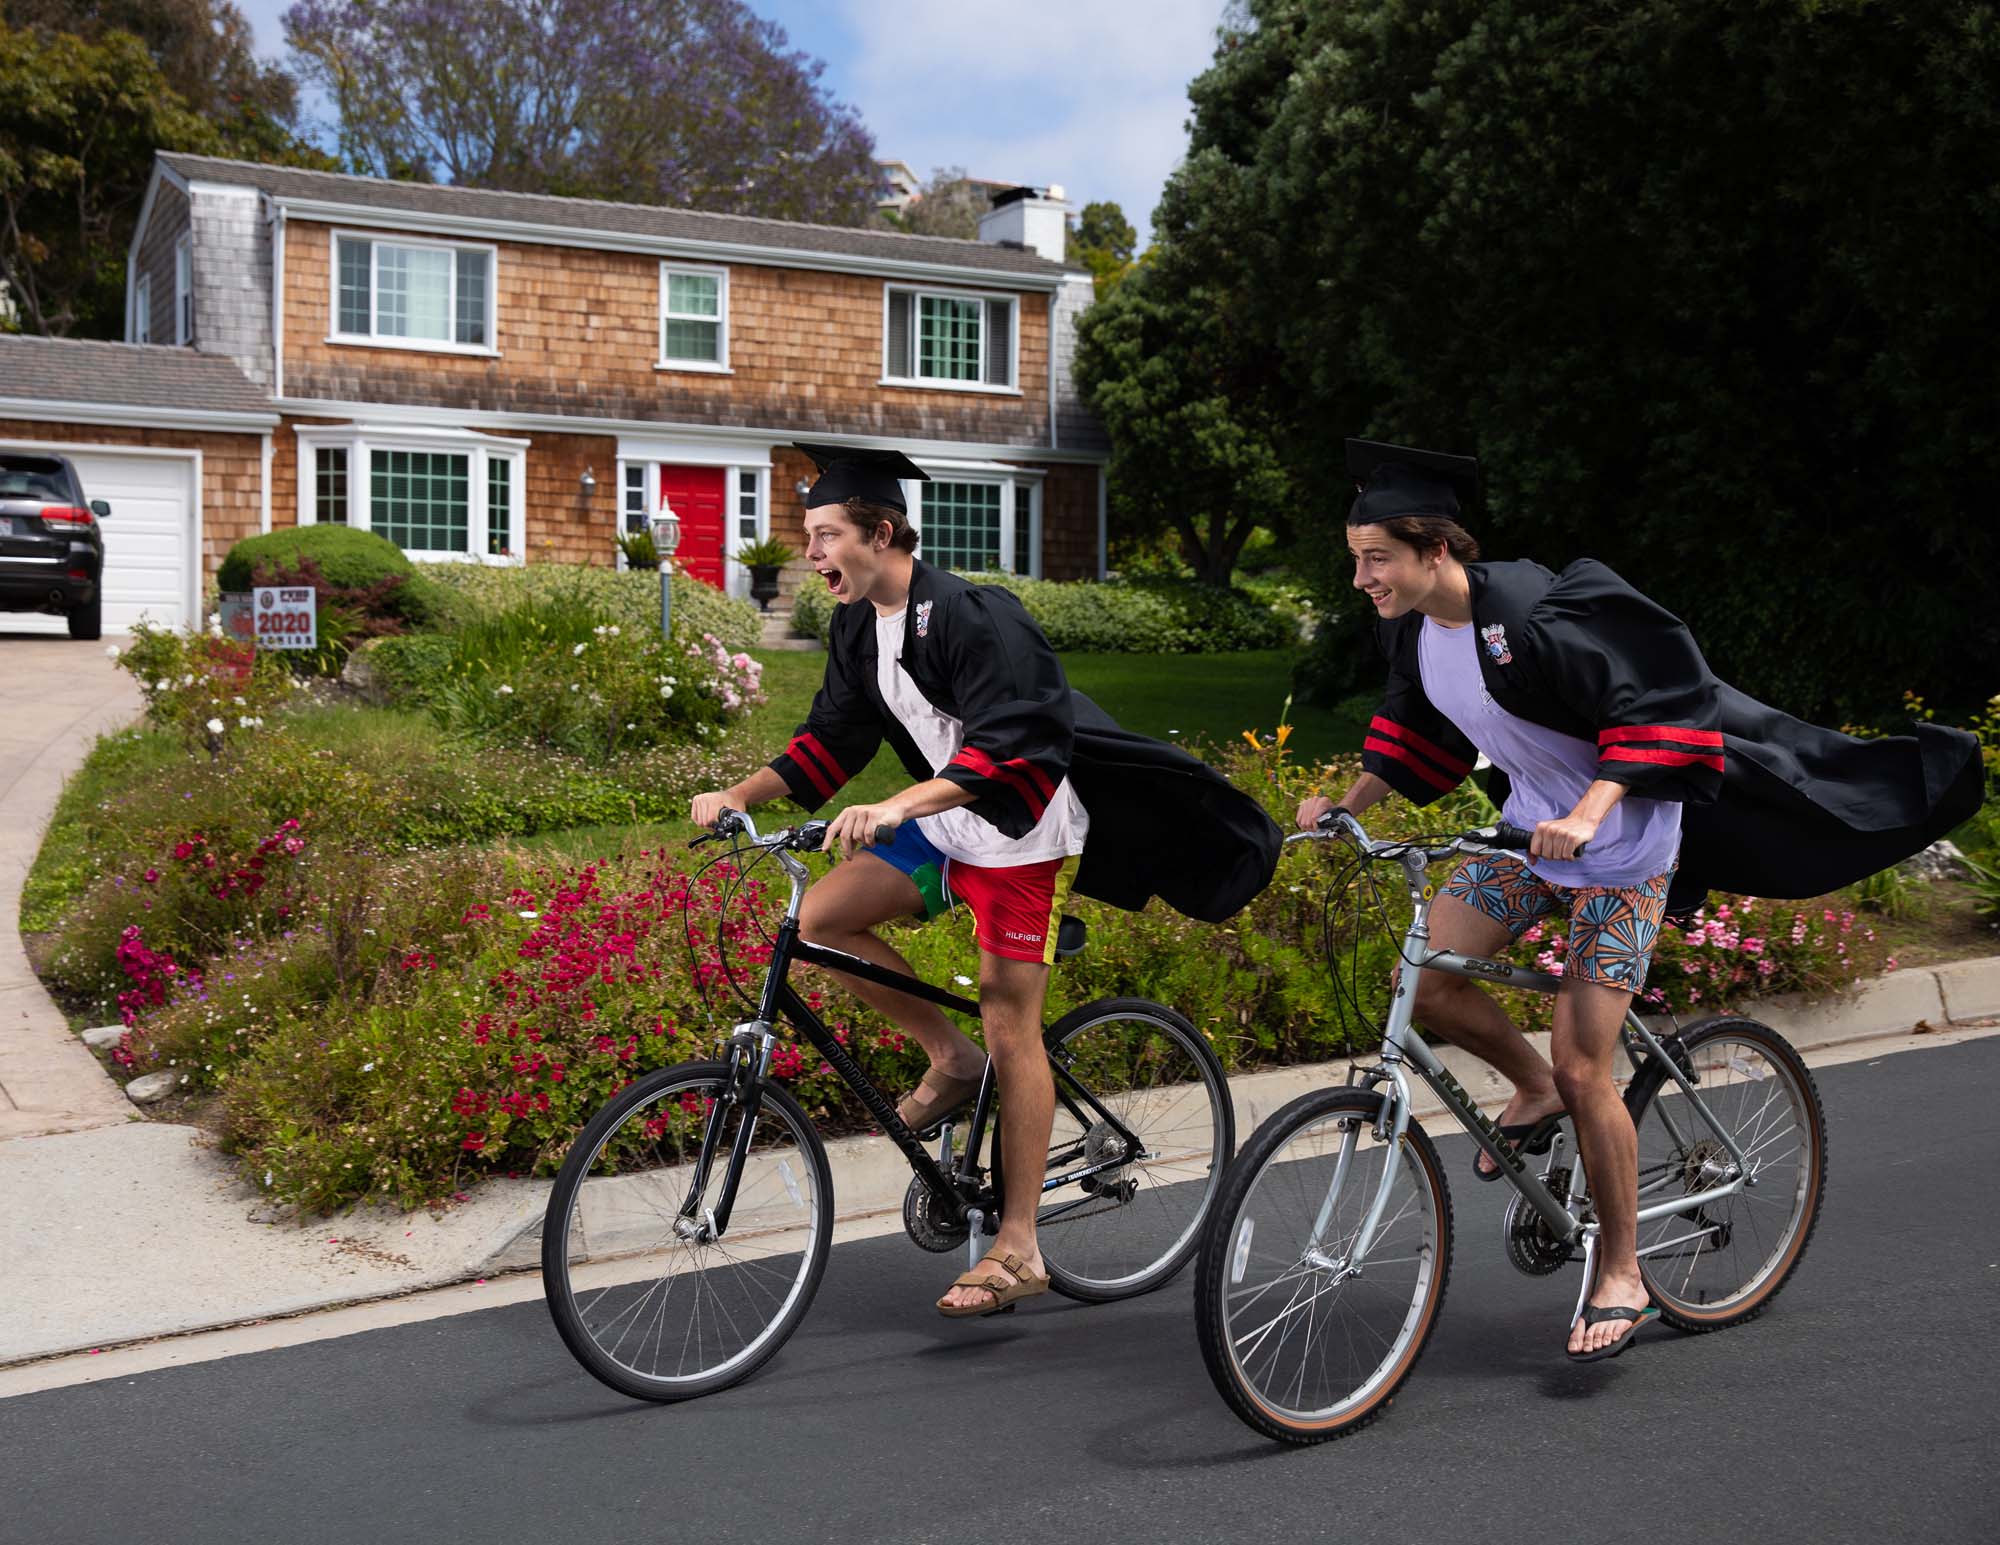 Dane Dawson (left) and Carter Harrigian (right) have returned to their bicycles during quarantine, citing it as one of the only outdoor activities they can do together and still be in compliance with L.A. County's 'safer at home' mandate. They reflected on their graduation disrupted by coronavirus.